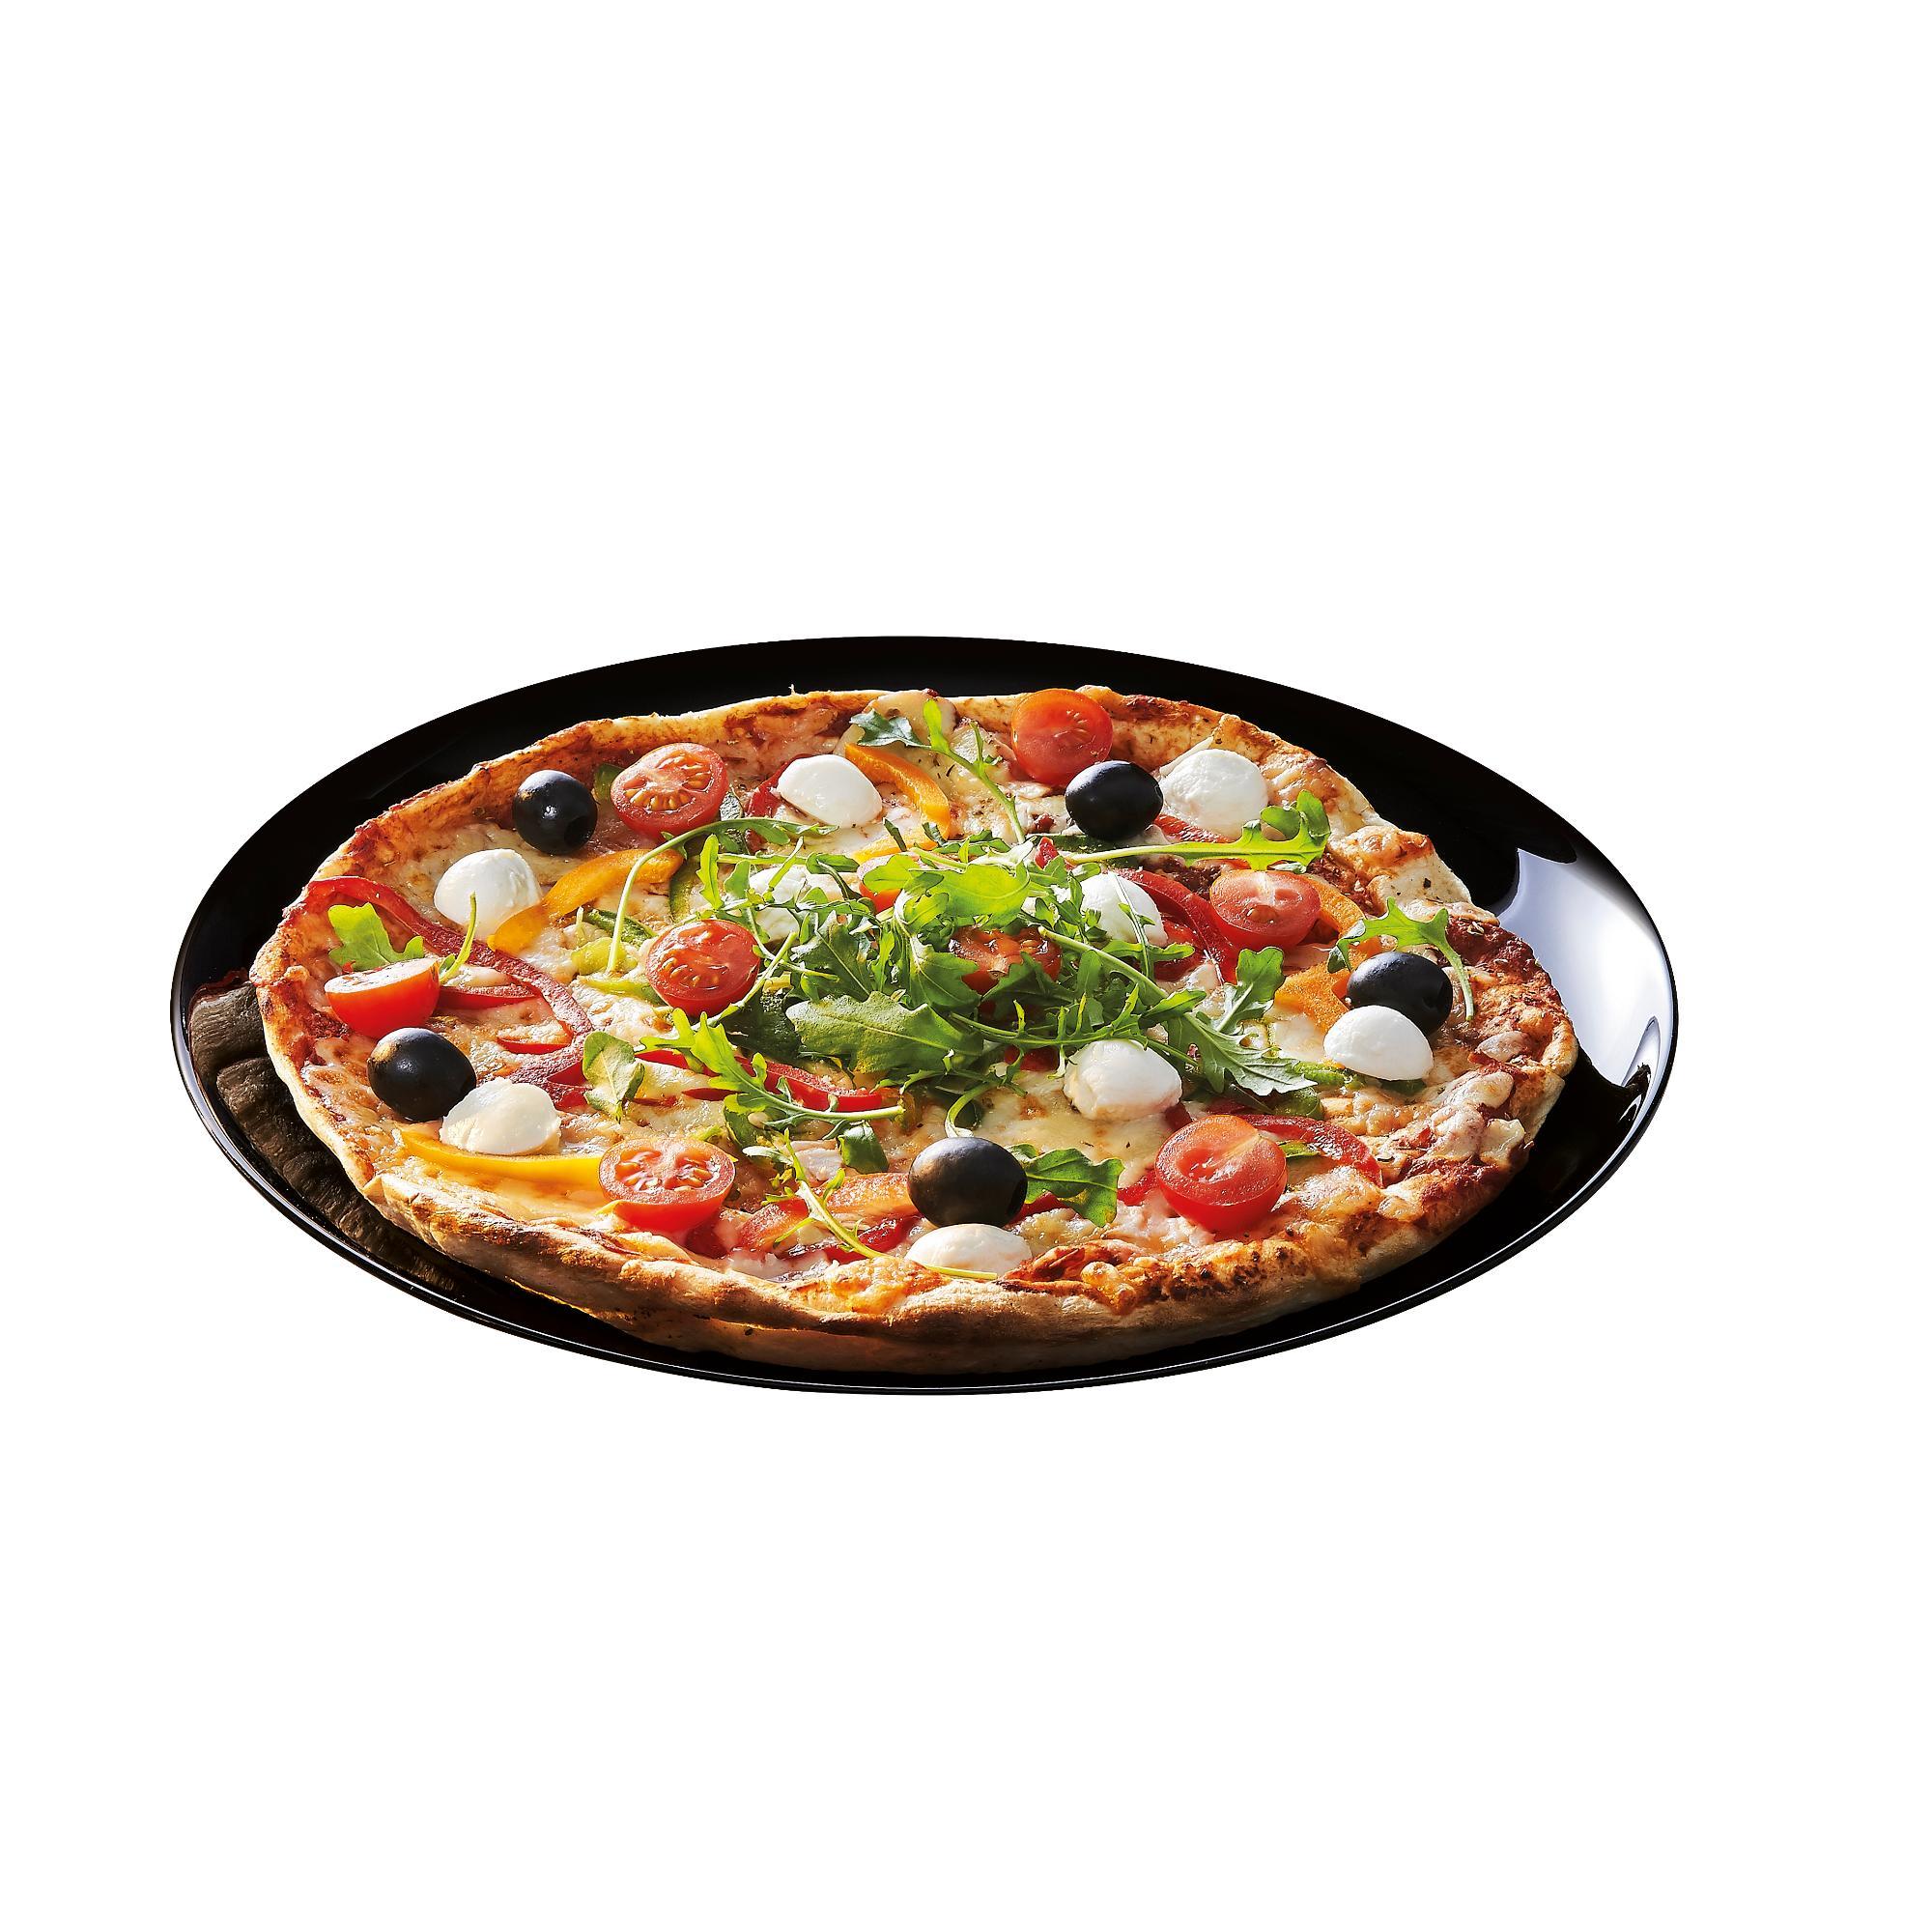 FRIEND'S TIME pizza plate, 312mm